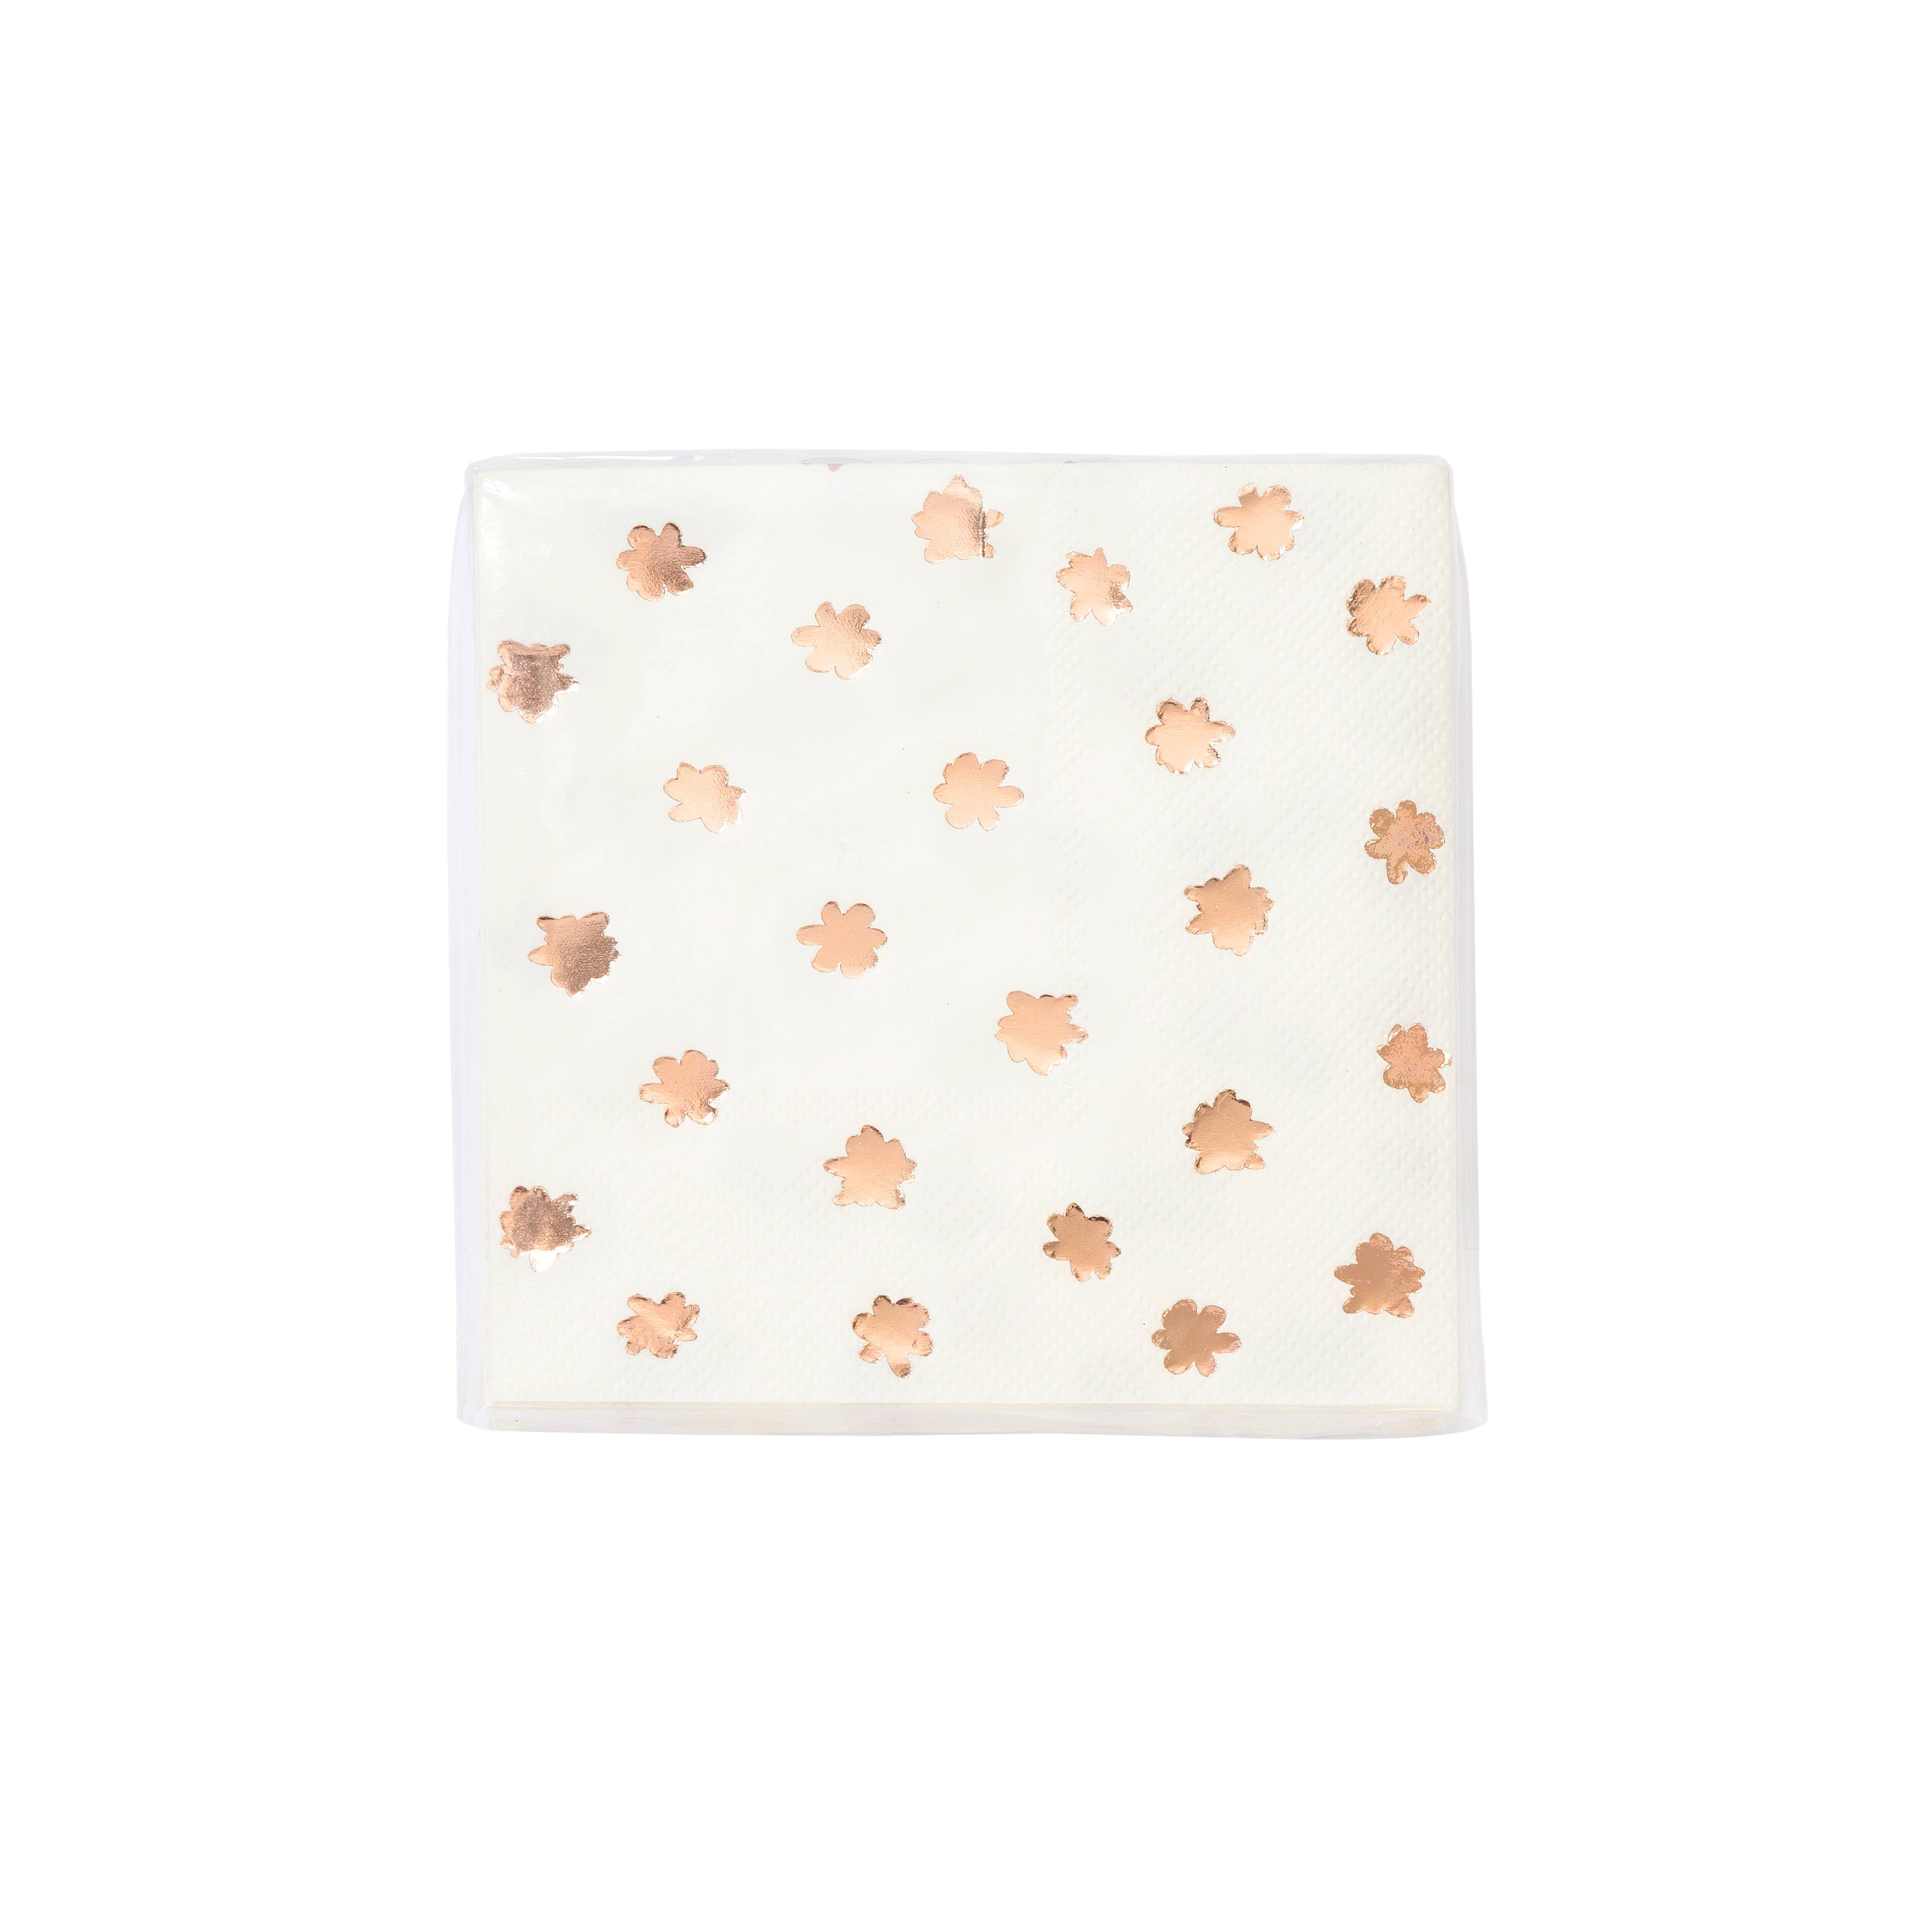 Party Porcelain Rose Gold Napkin by Talking Tables. Pretty rose gold themed party napkins